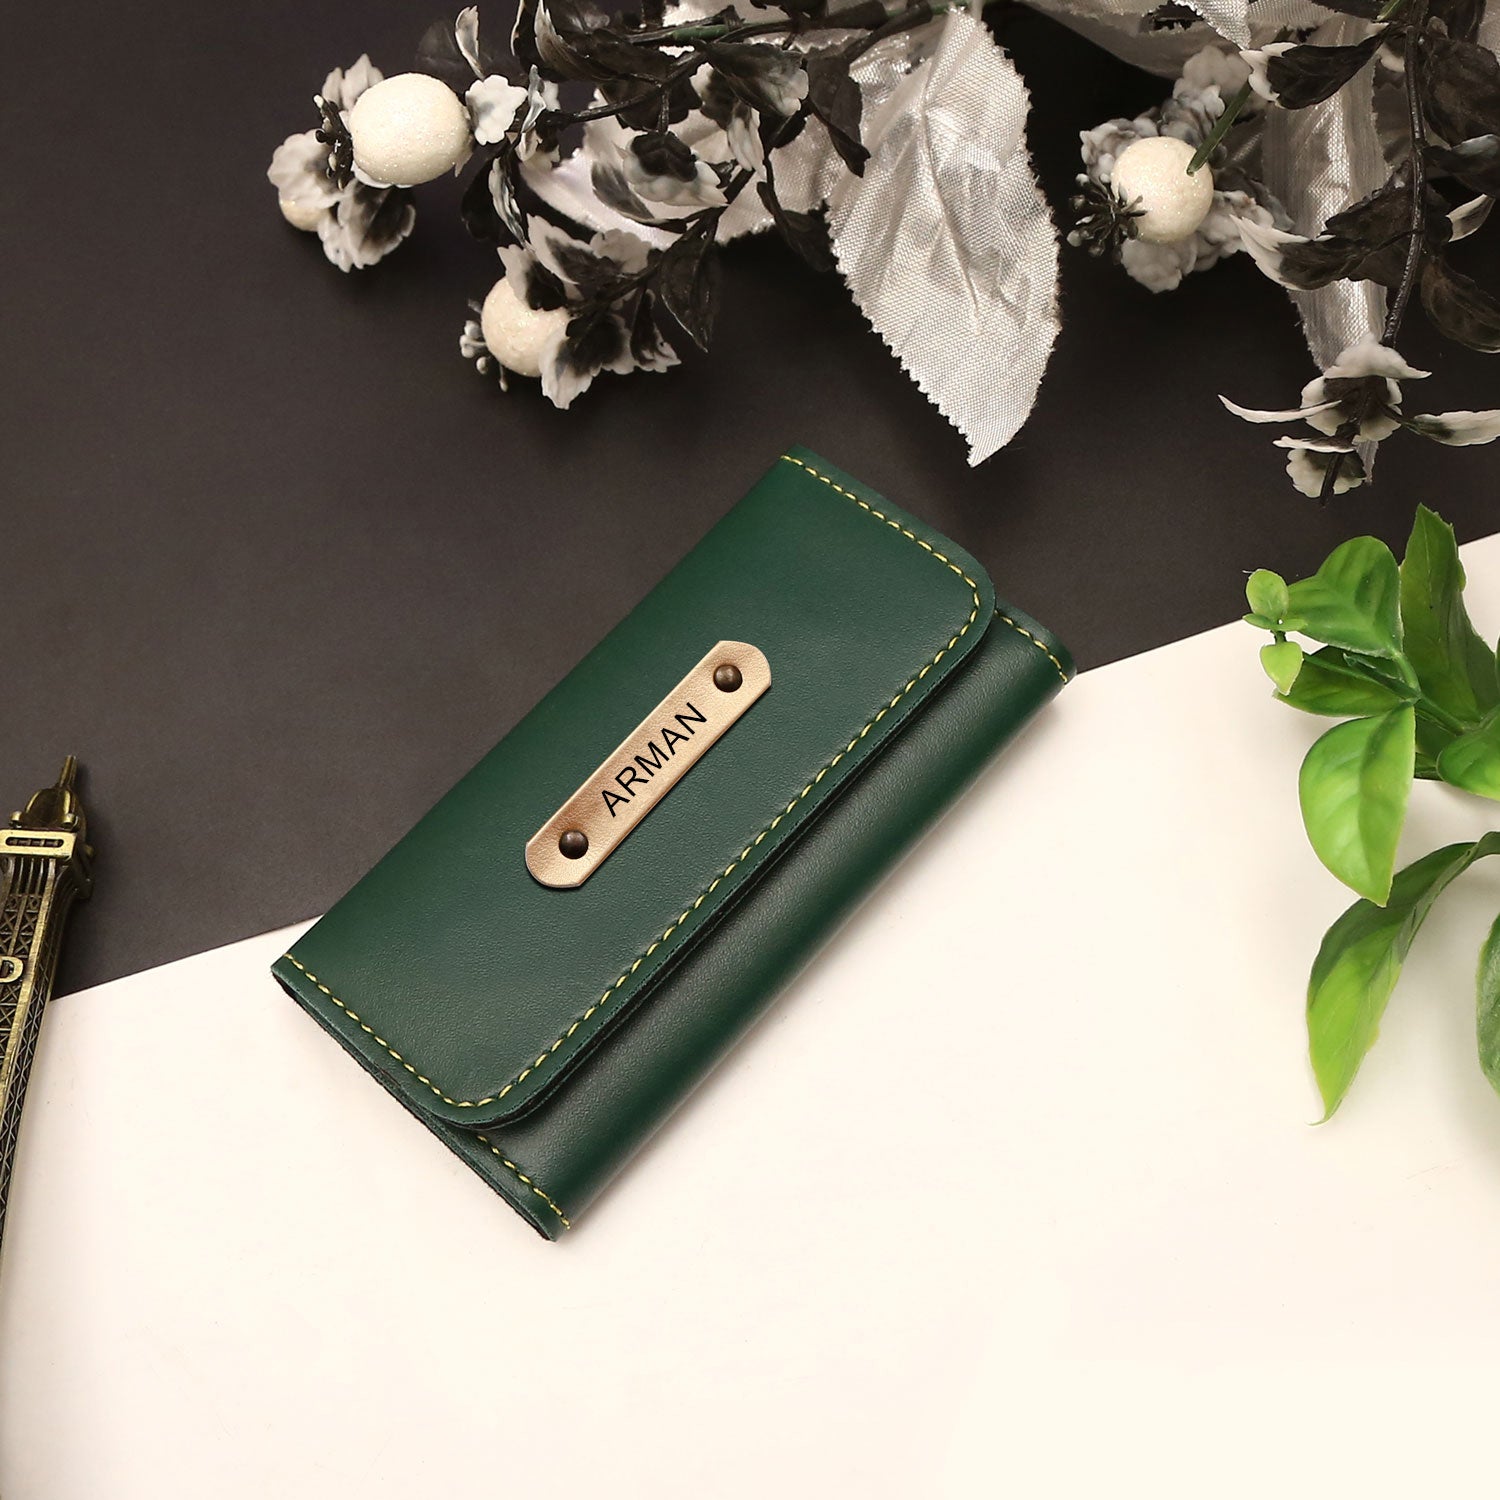 Personalized Key Case With Name - Green